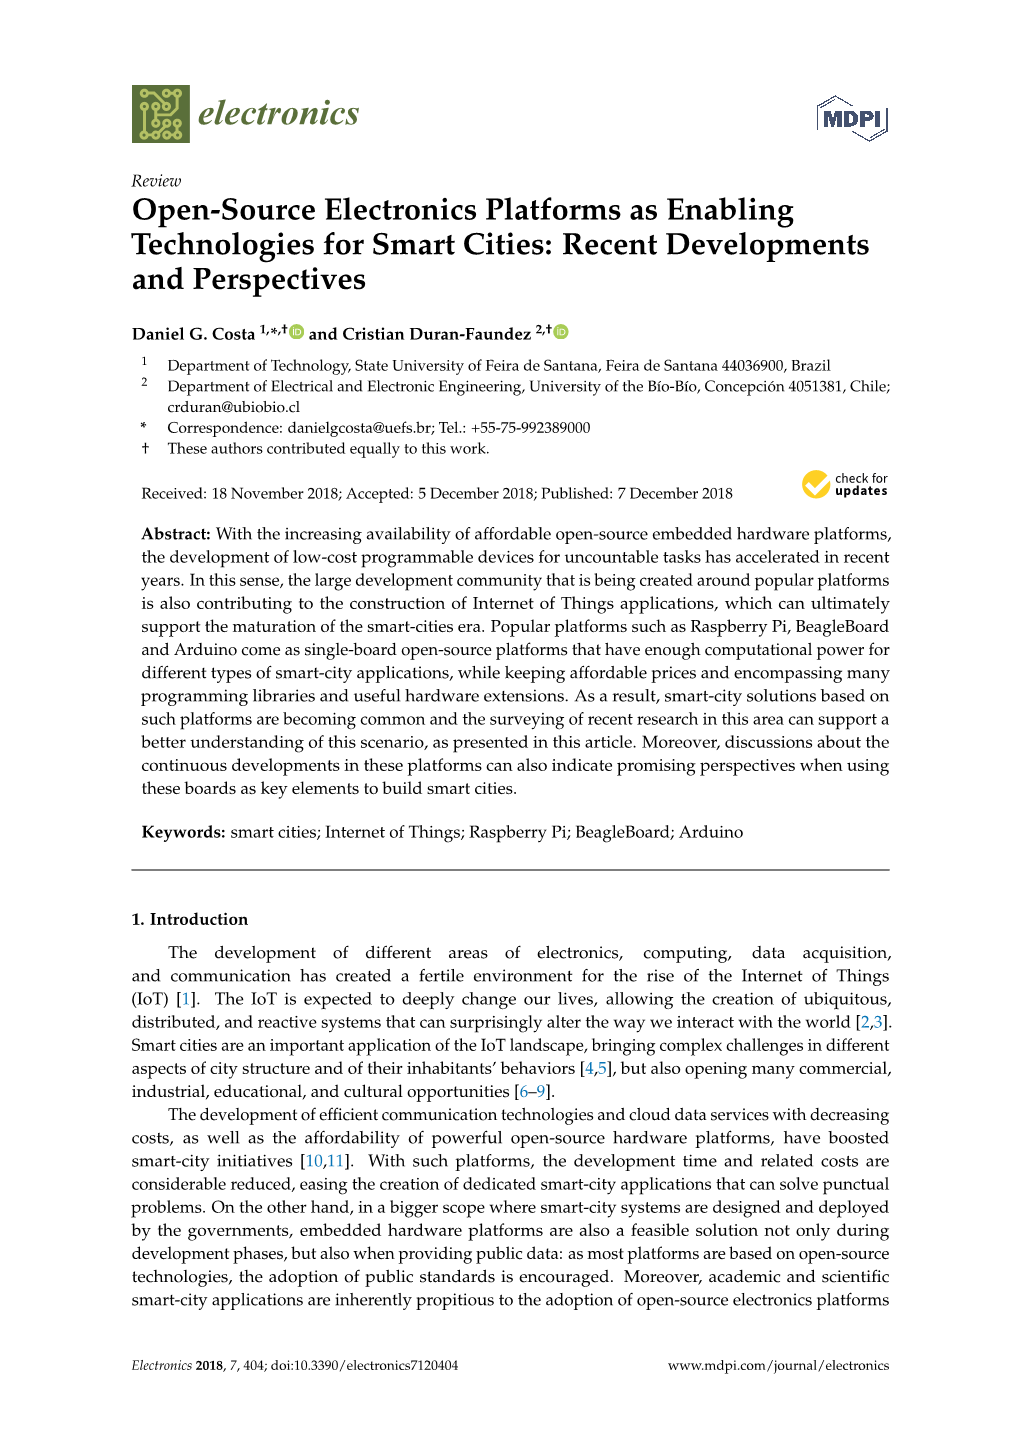 Open-Source Electronics Platforms As Enabling Technologies for Smart Cities: Recent Developments and Perspectives